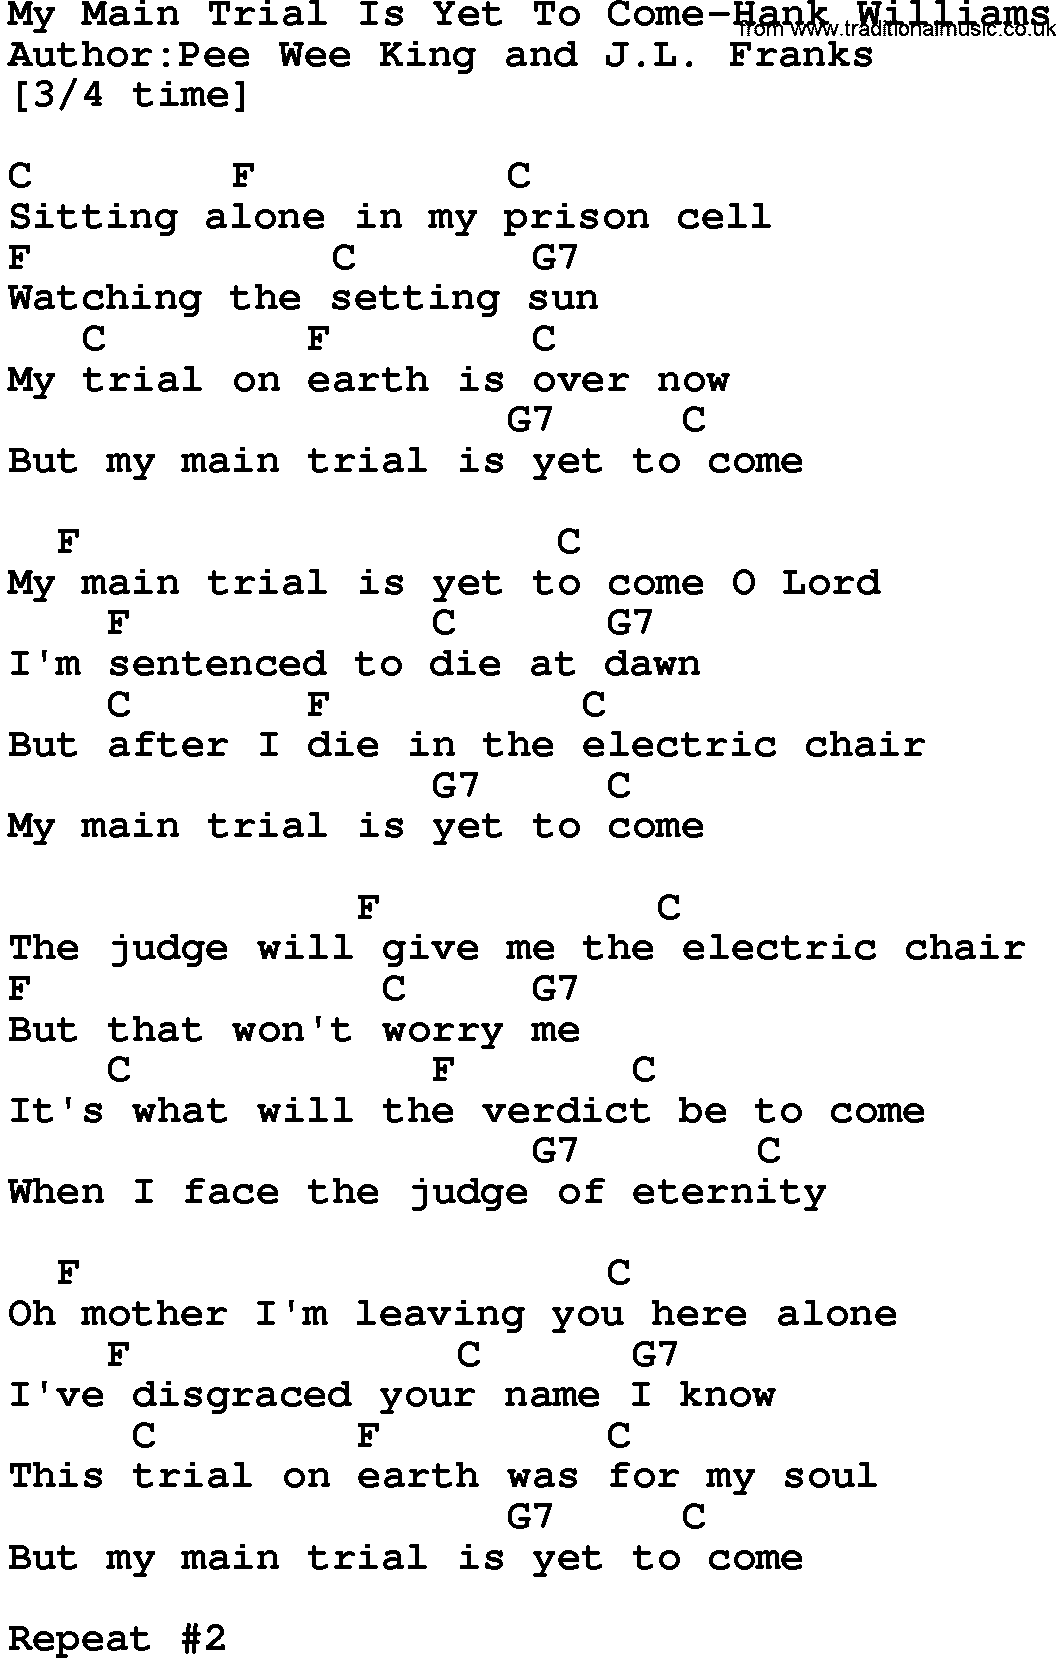 Country music song: My Main Trial Is Yet To Come-Hank Williams lyrics and chords